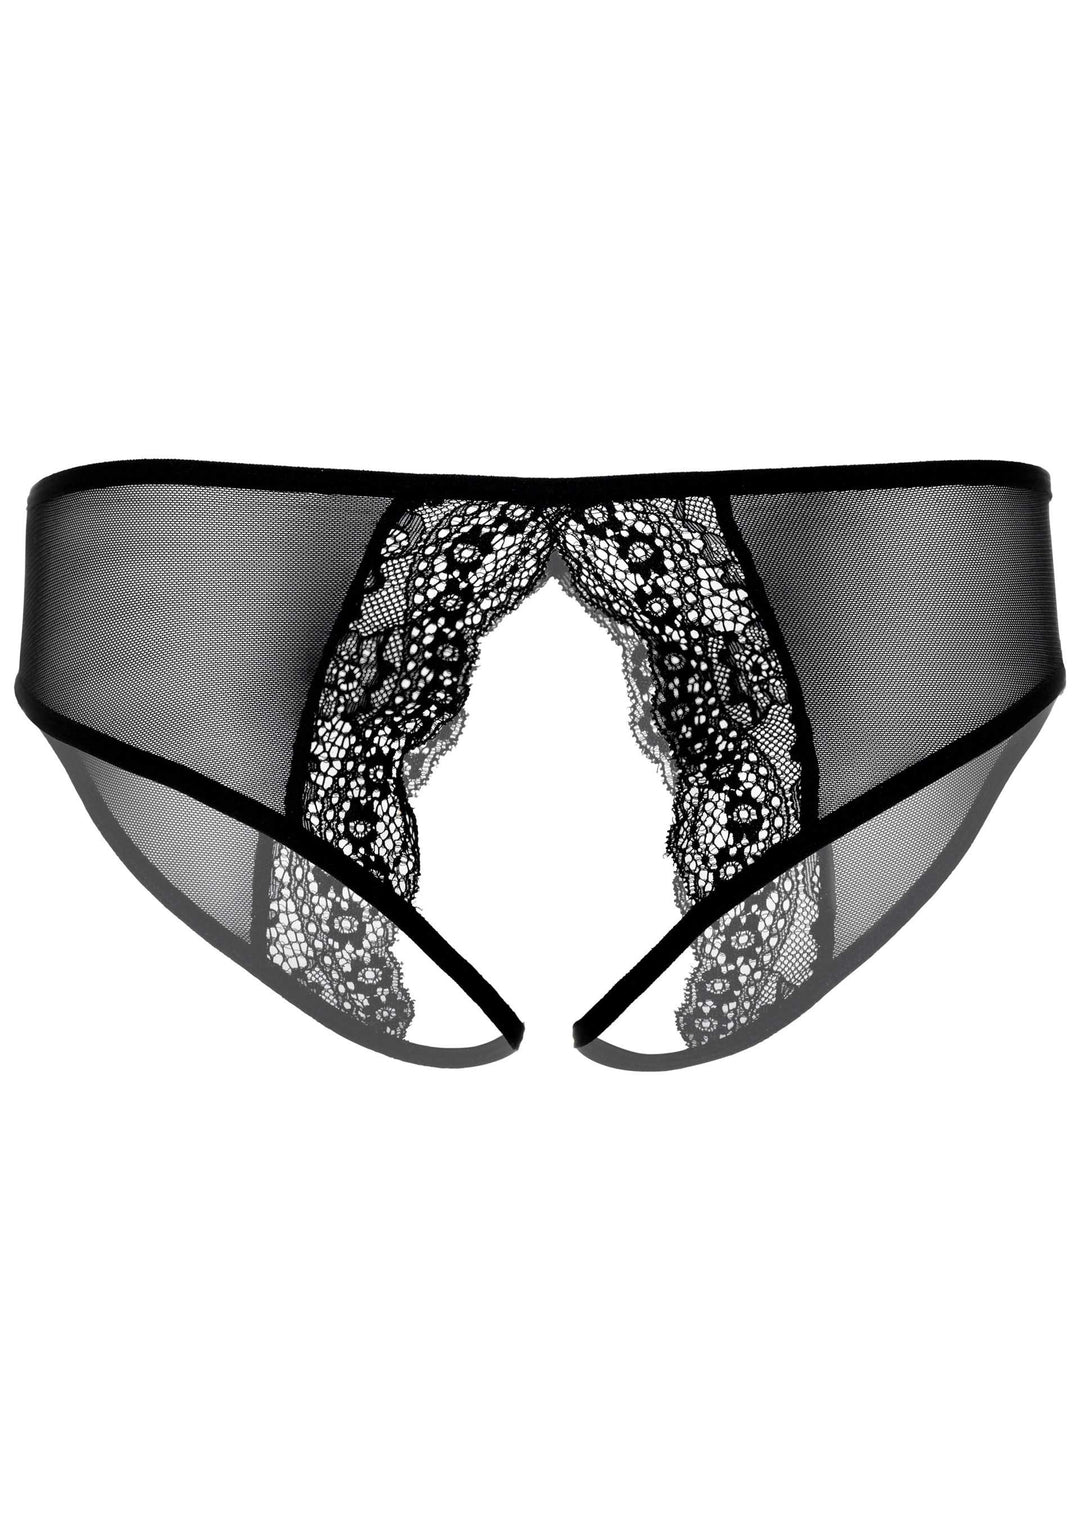 Women's briefs with lace open underwear Angel naughty crotchless panty